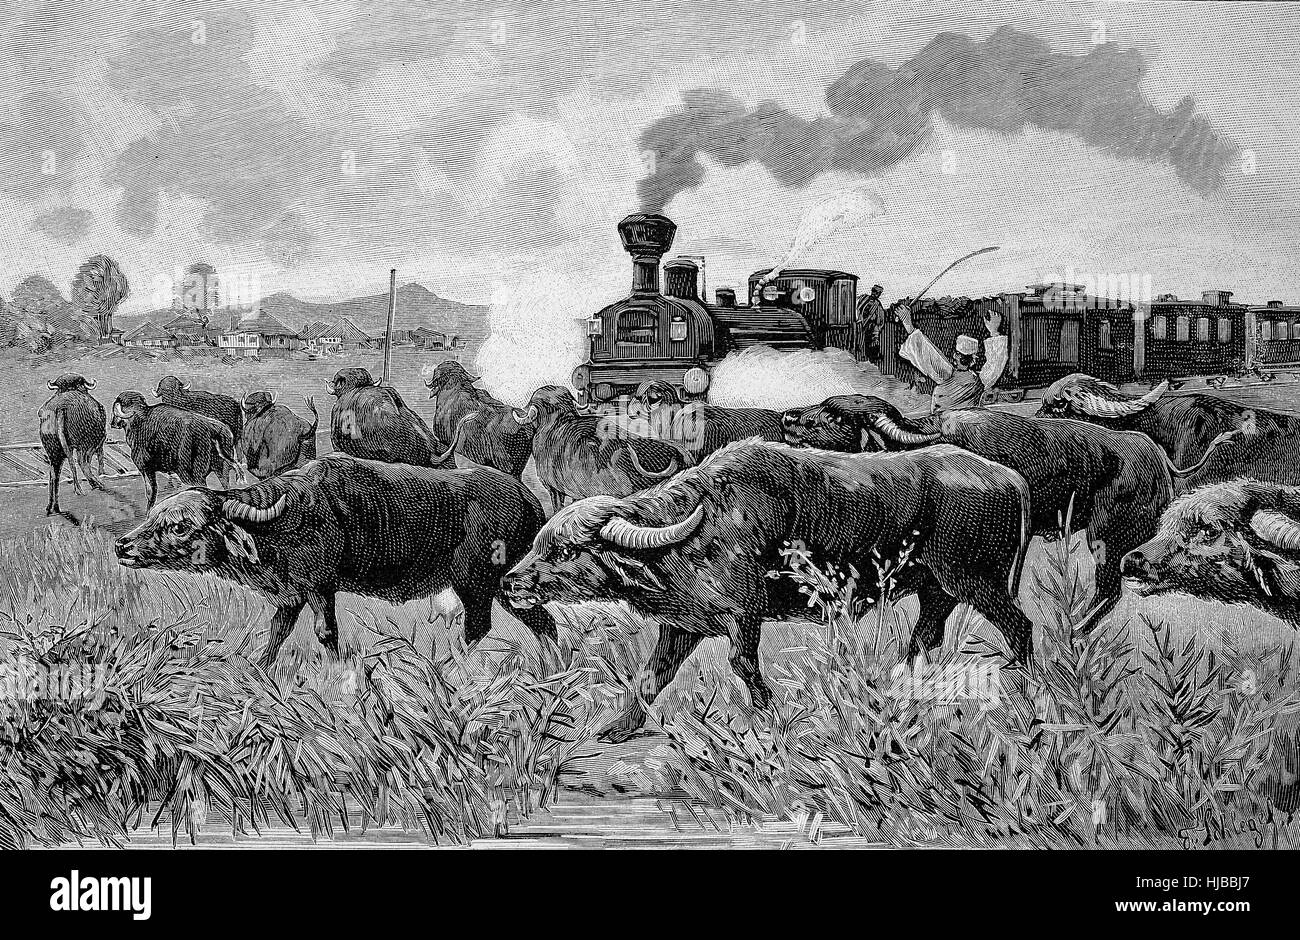 The Orient Express was stopped by a Buffalo herd, historical image or illustration from the year 1894, digital improved Stock Photo